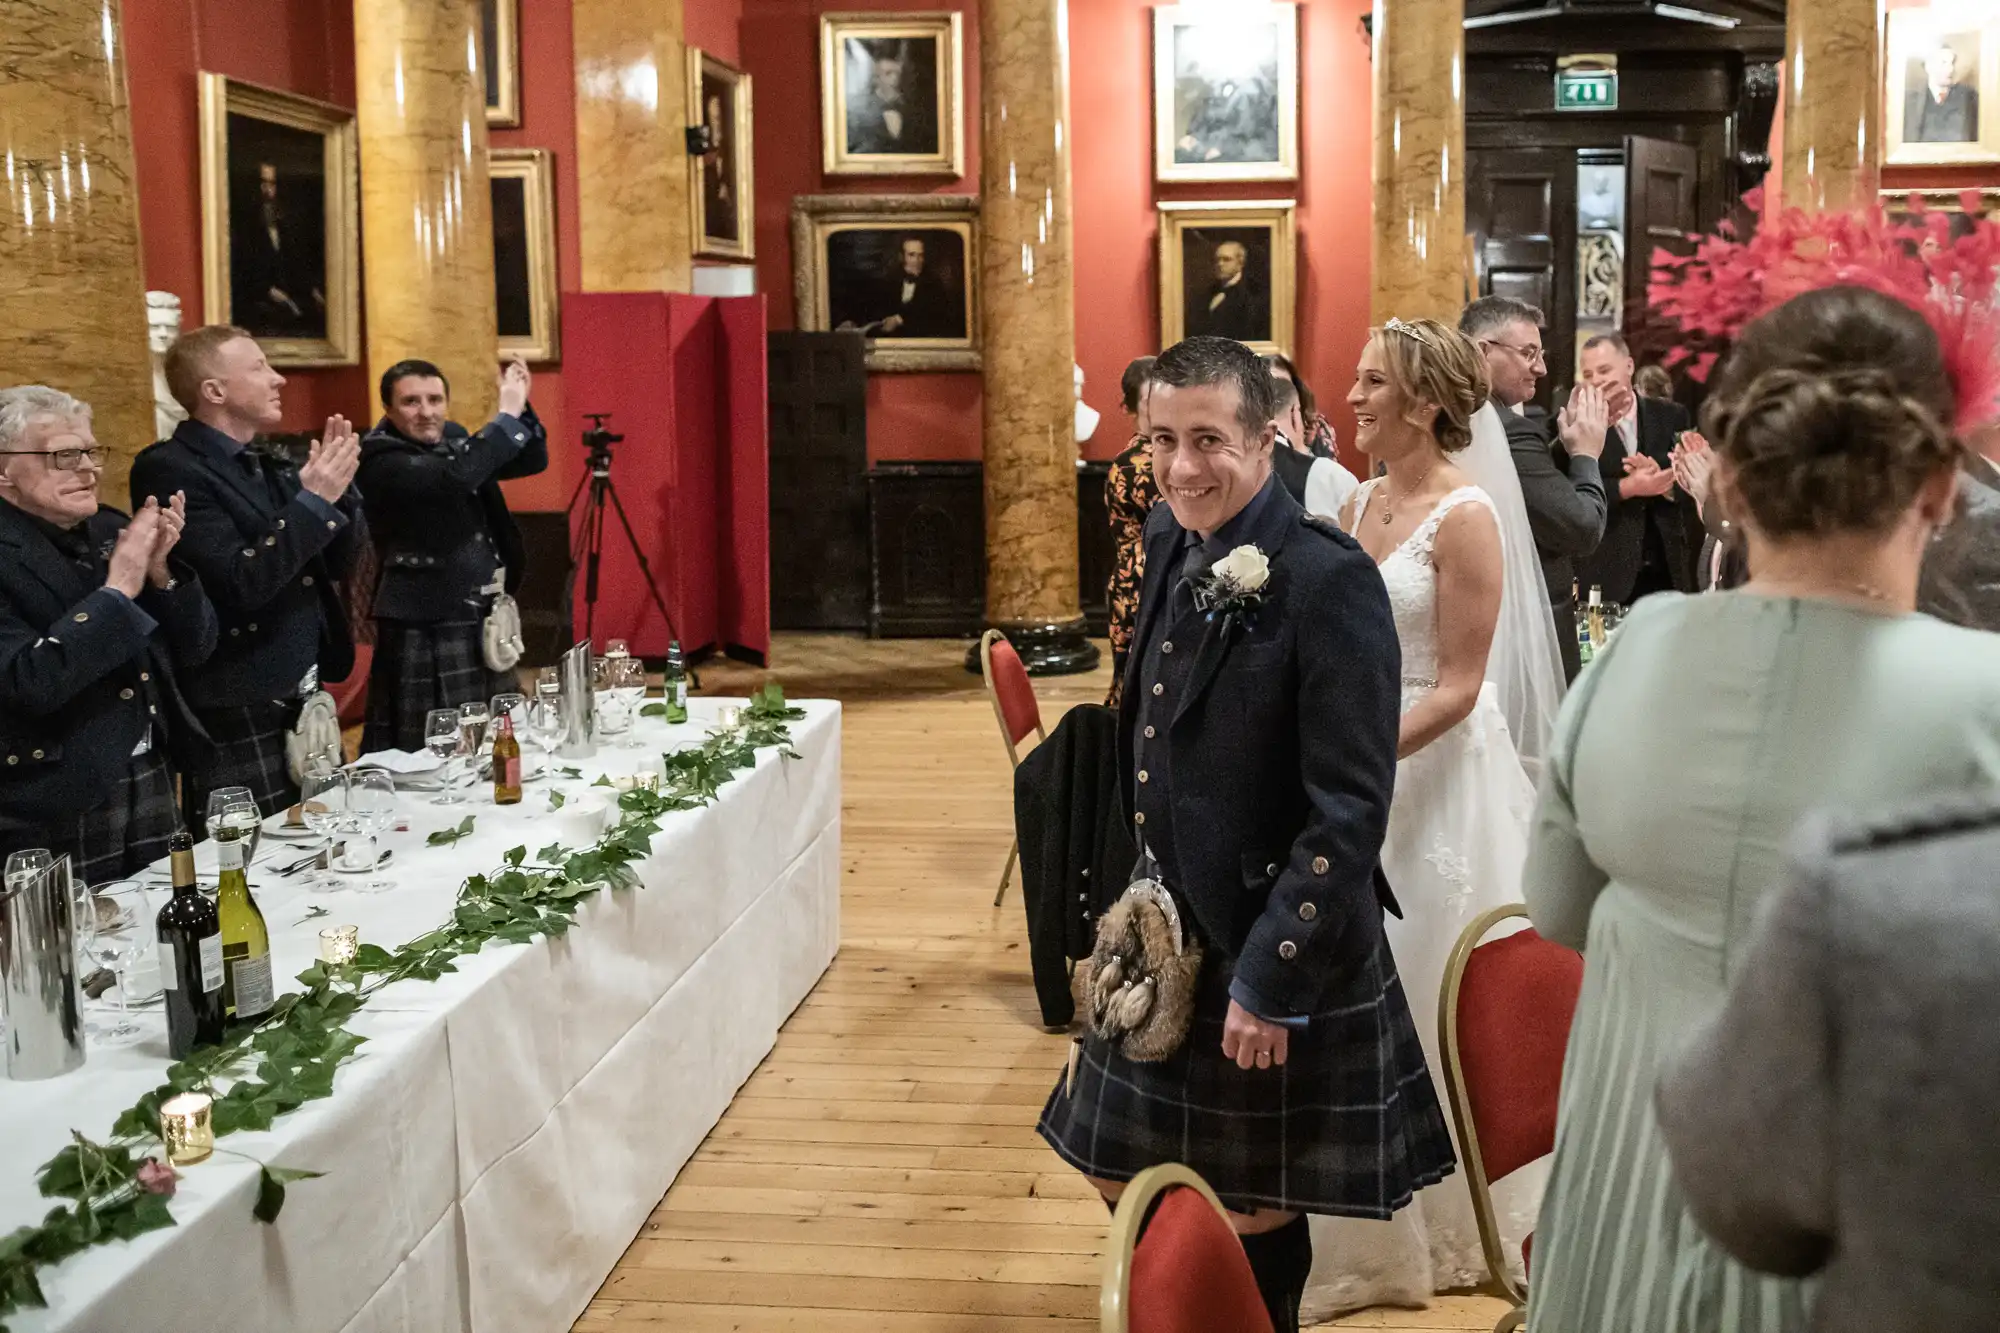 A groom in a kilt and a bride are greeted with applause as they walk into a reception in a hall with red walls and portraits. Guests are seated at decorated tables.